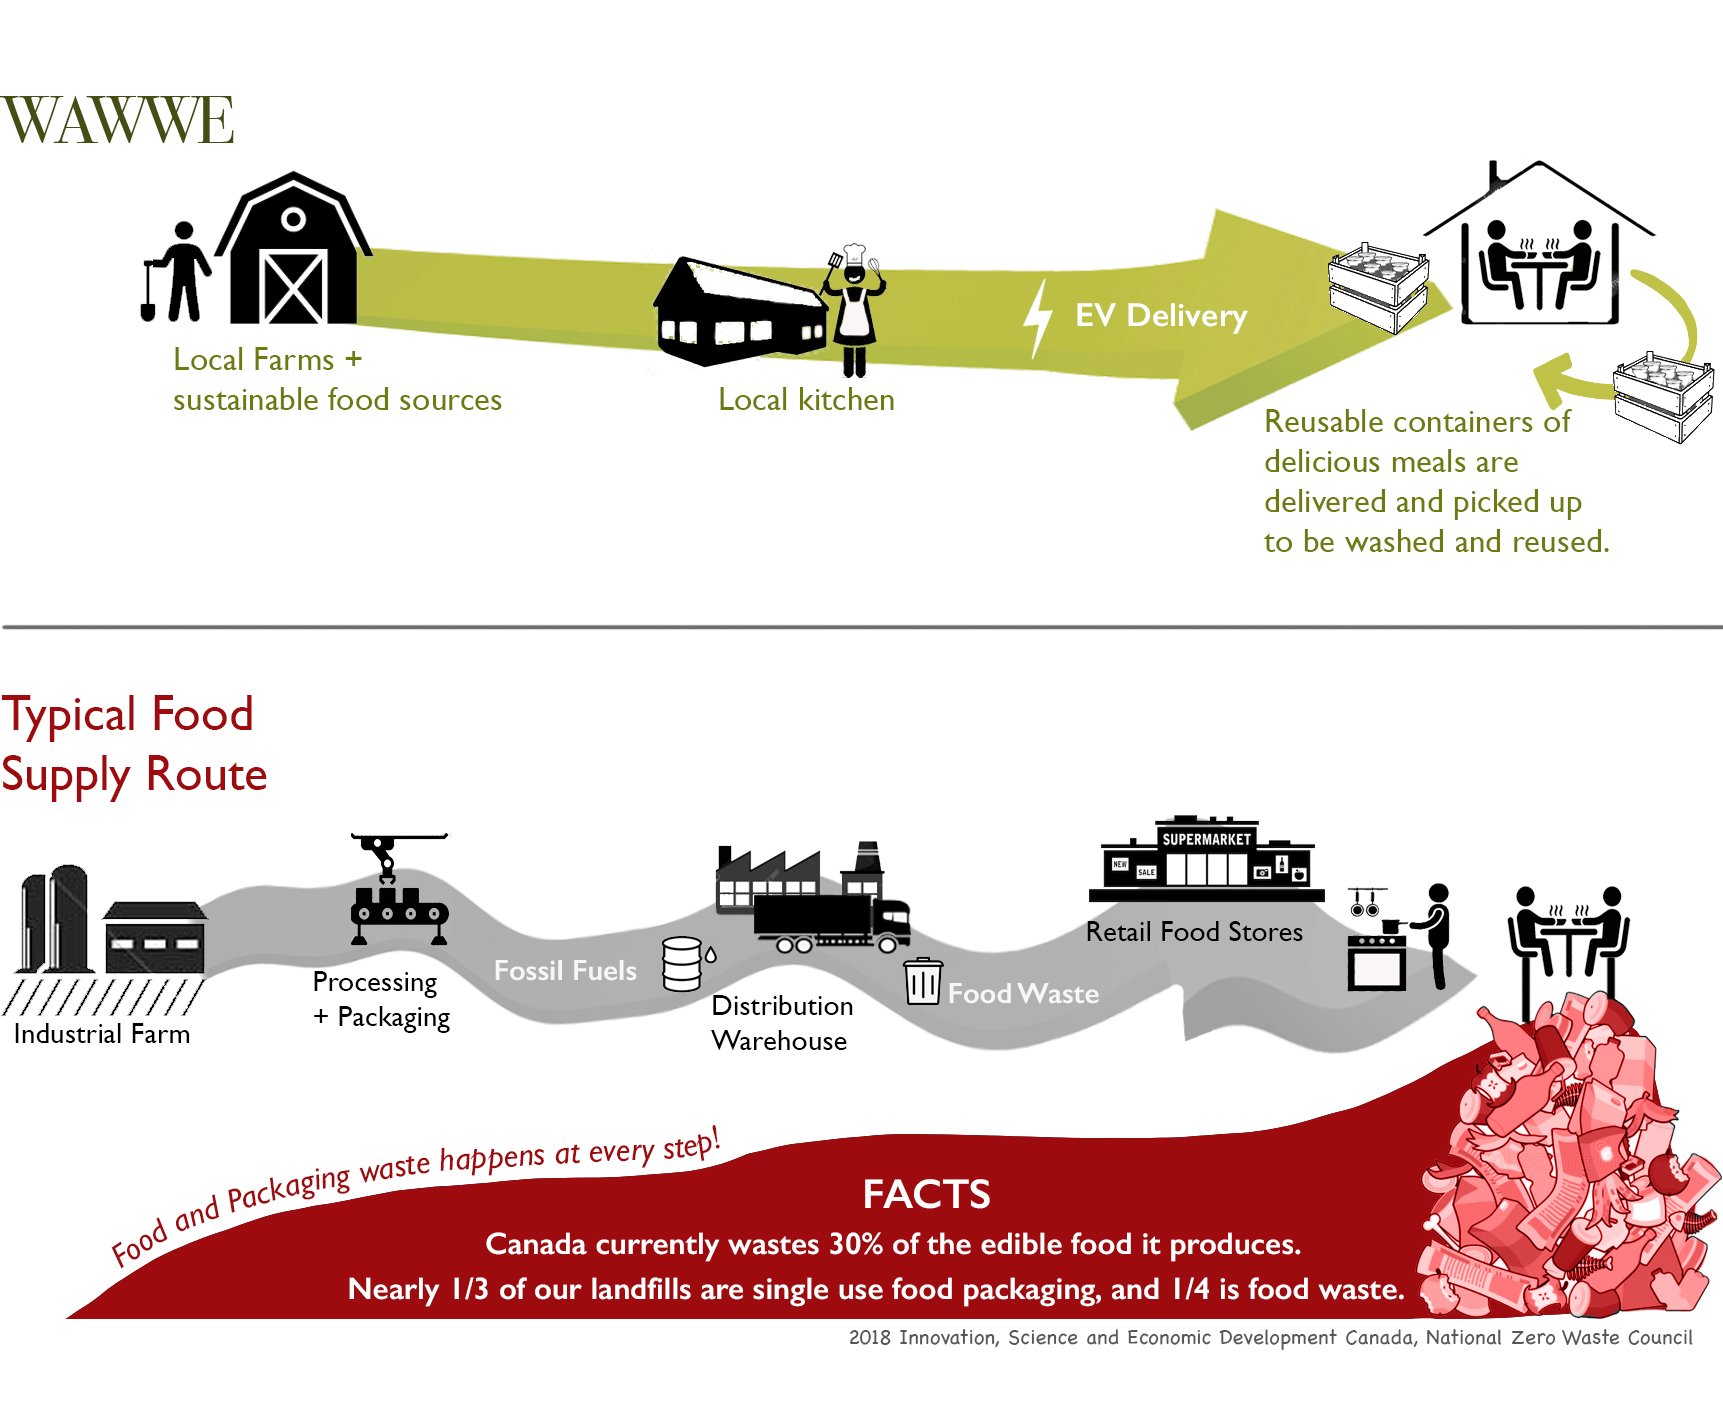 WAWWE Meal Delivery Service Supply Chain Compared to Typical Food Supply Route